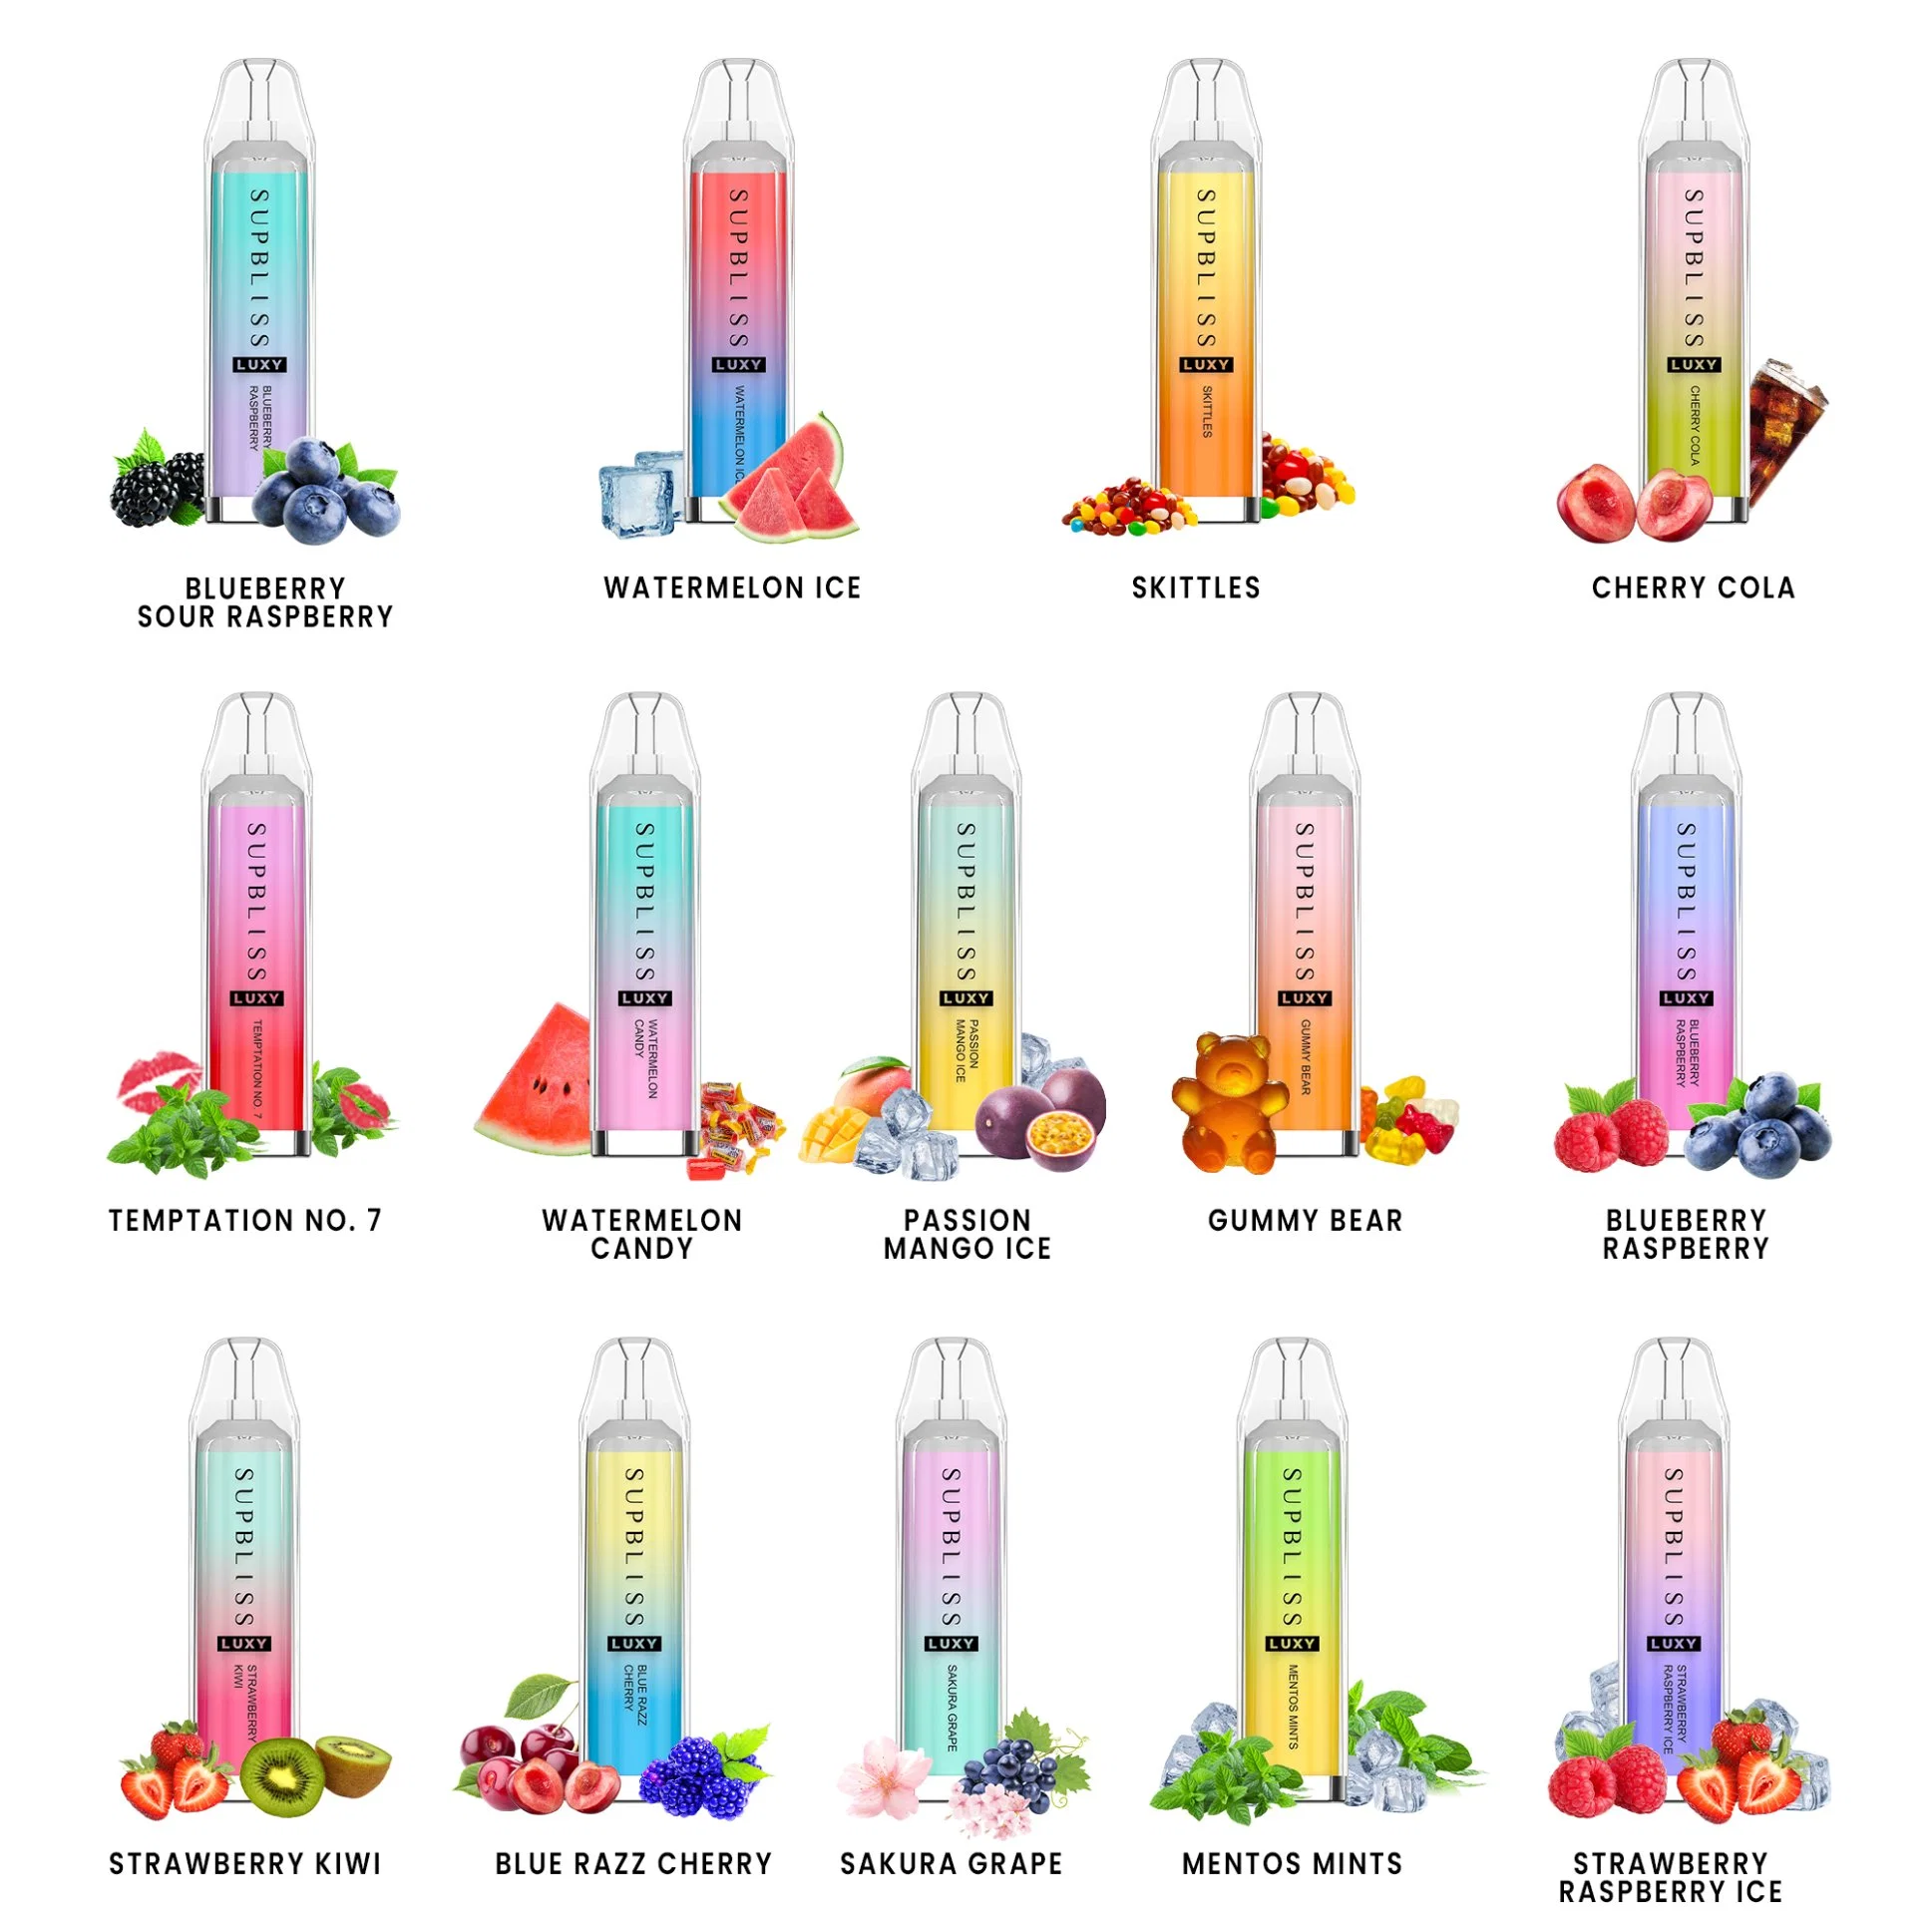 Mesh Coil Original Manufacture Factory Supbliss Luxy 4000puffs Disposable/Chargeable Vape Device Pod Vape Wholesale/Supplier Disposable/Chargeable Vape